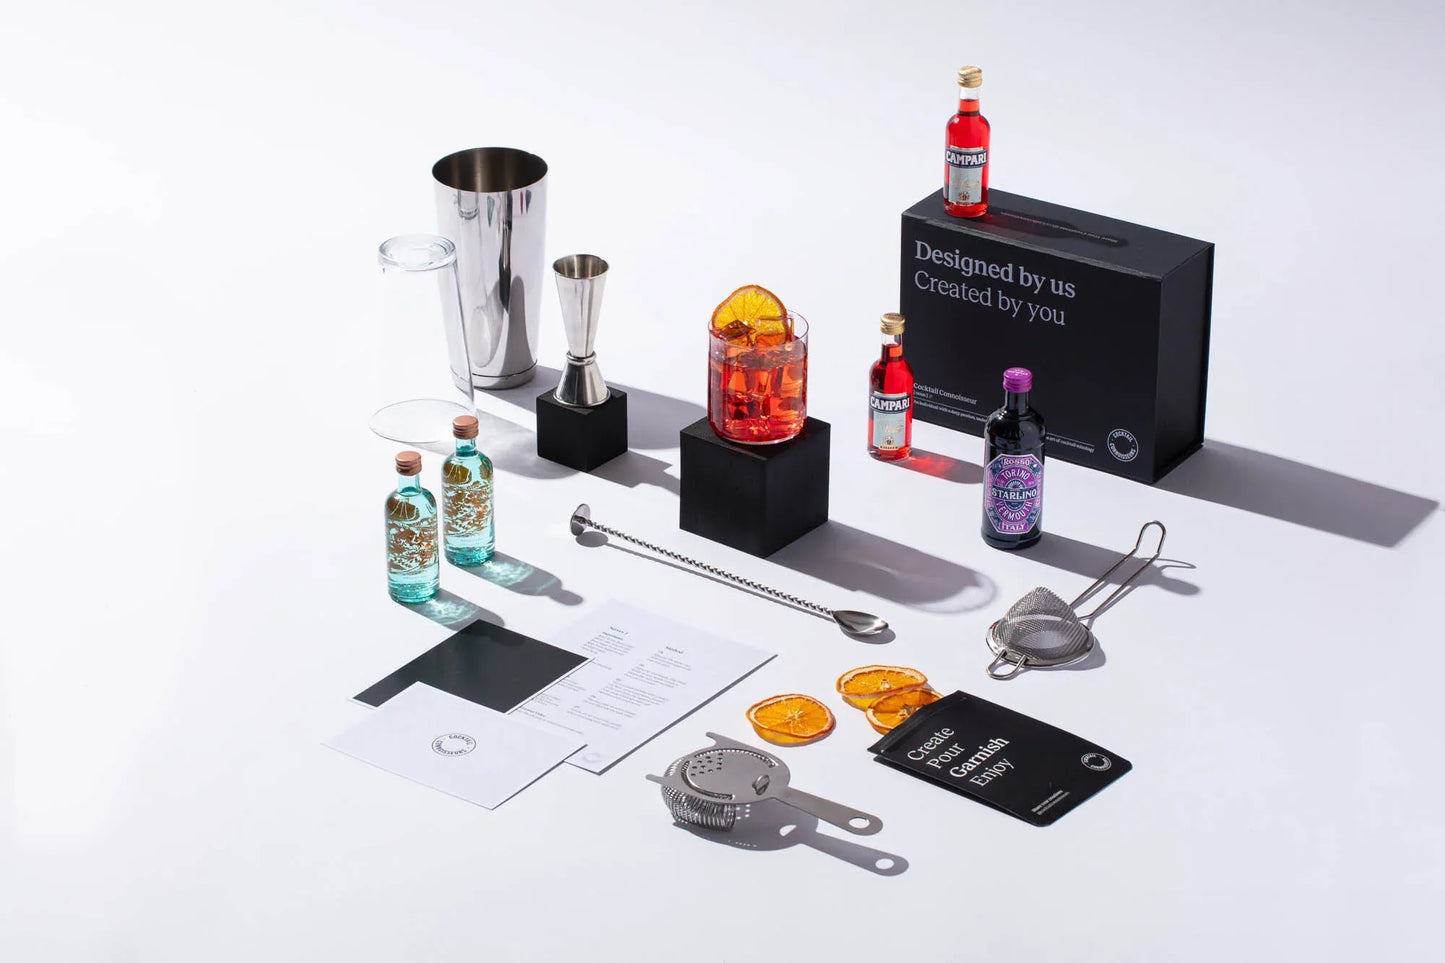 Negroni cocktail kit gift set with advanced bar equipment